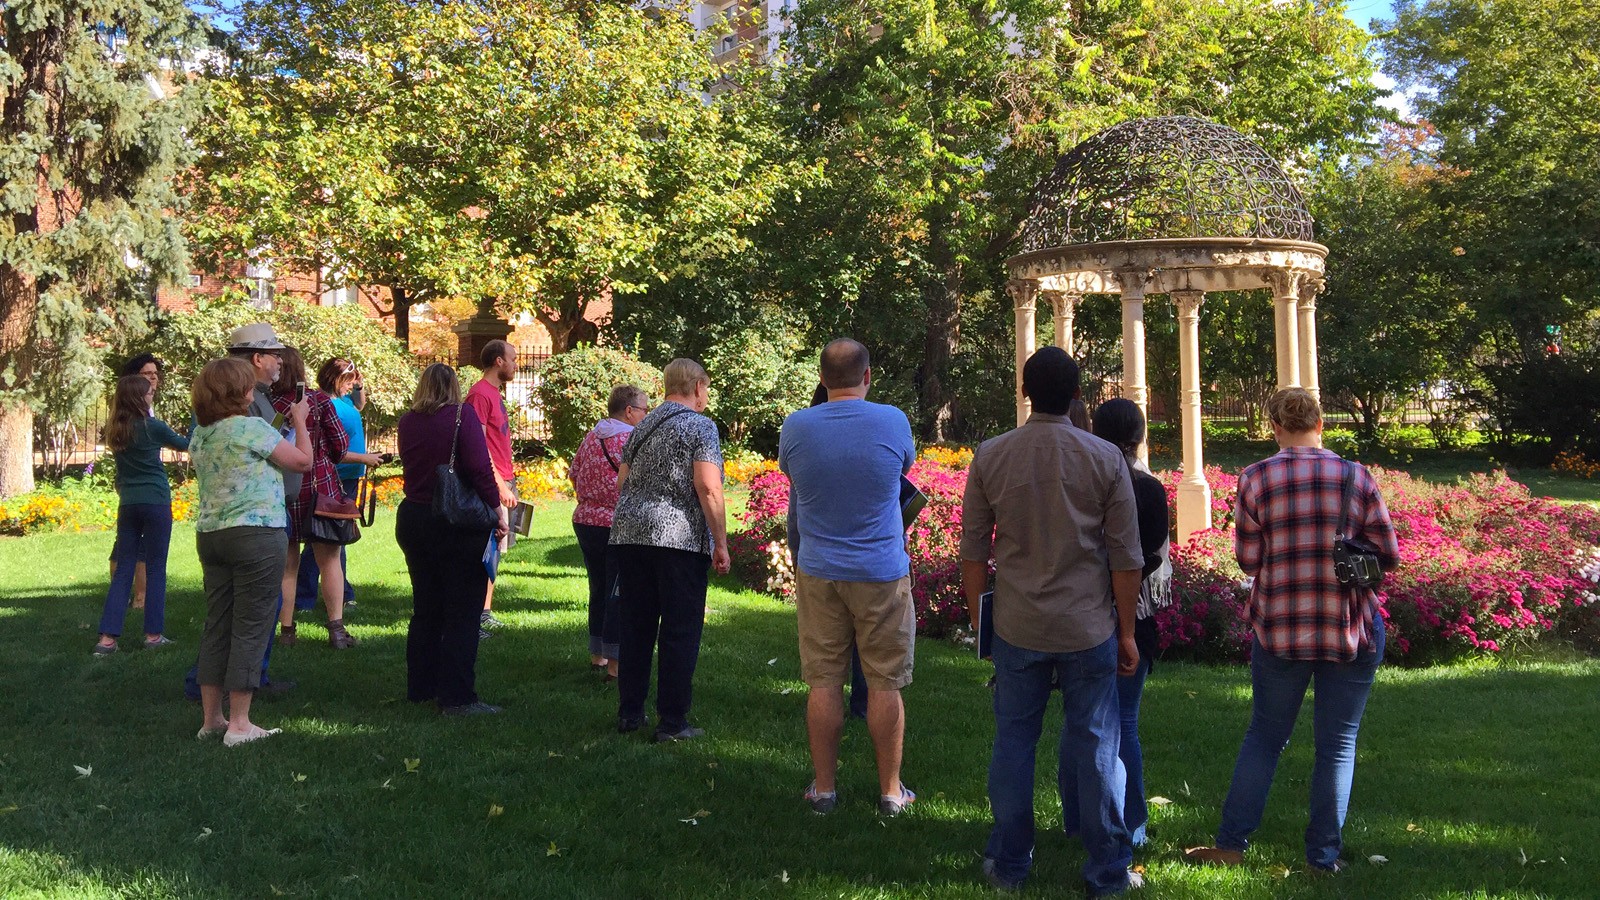 Tour attendees at the Governor's Residence at the Boettcher Mansion